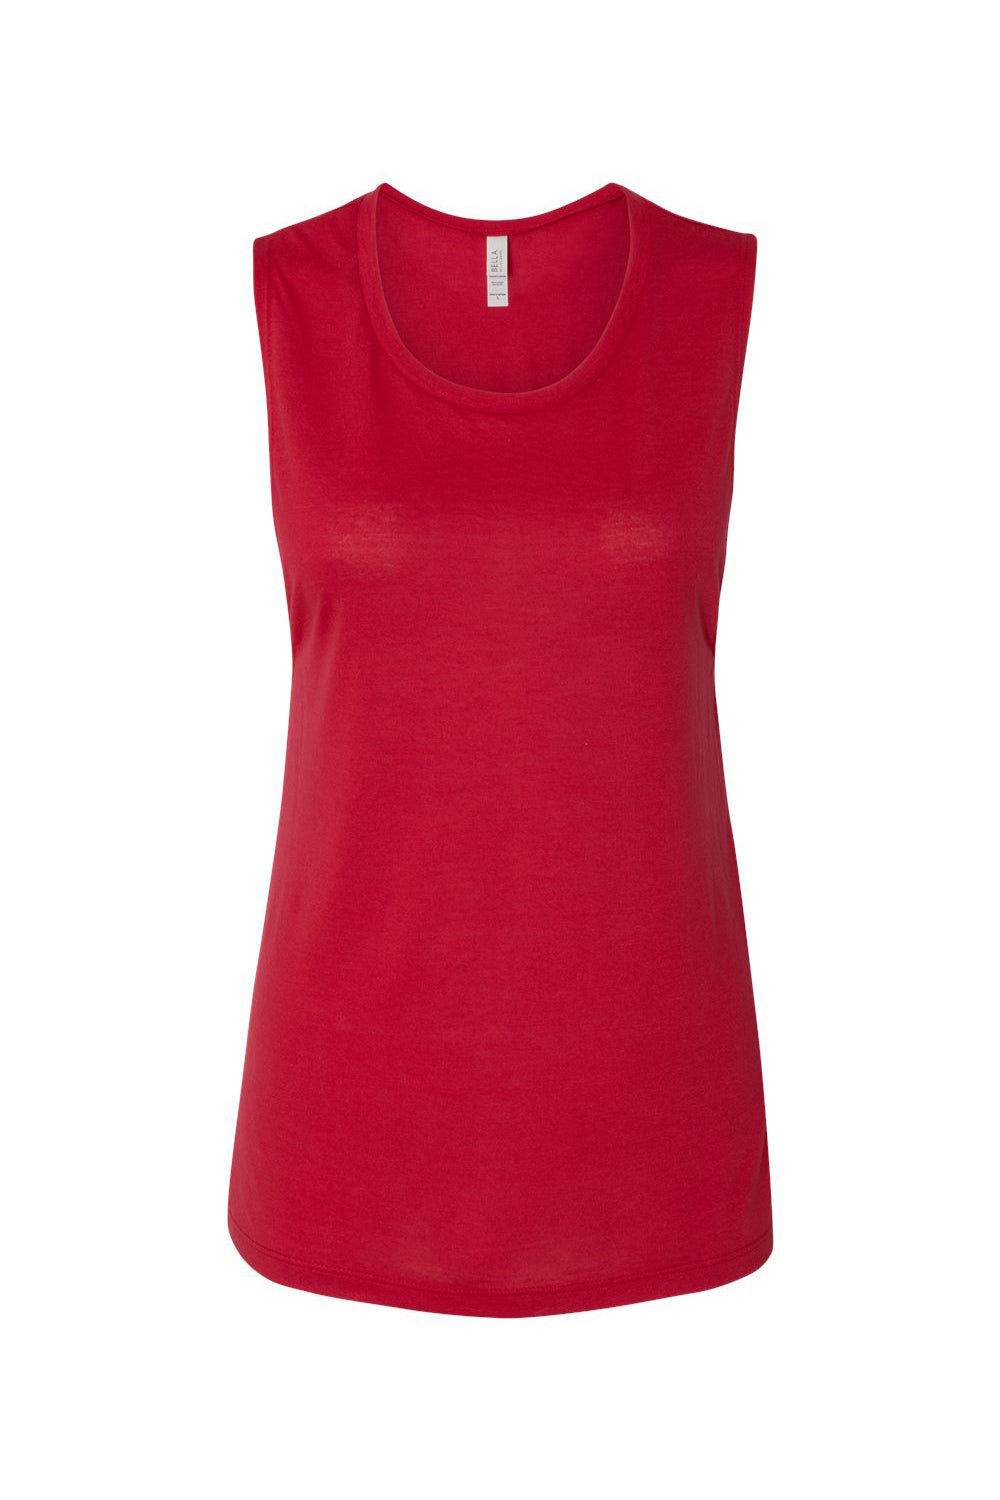 Bella + Canvas BC8803/B8803/8803 Womens Flowy Muscle Tank Top Red Flat Front